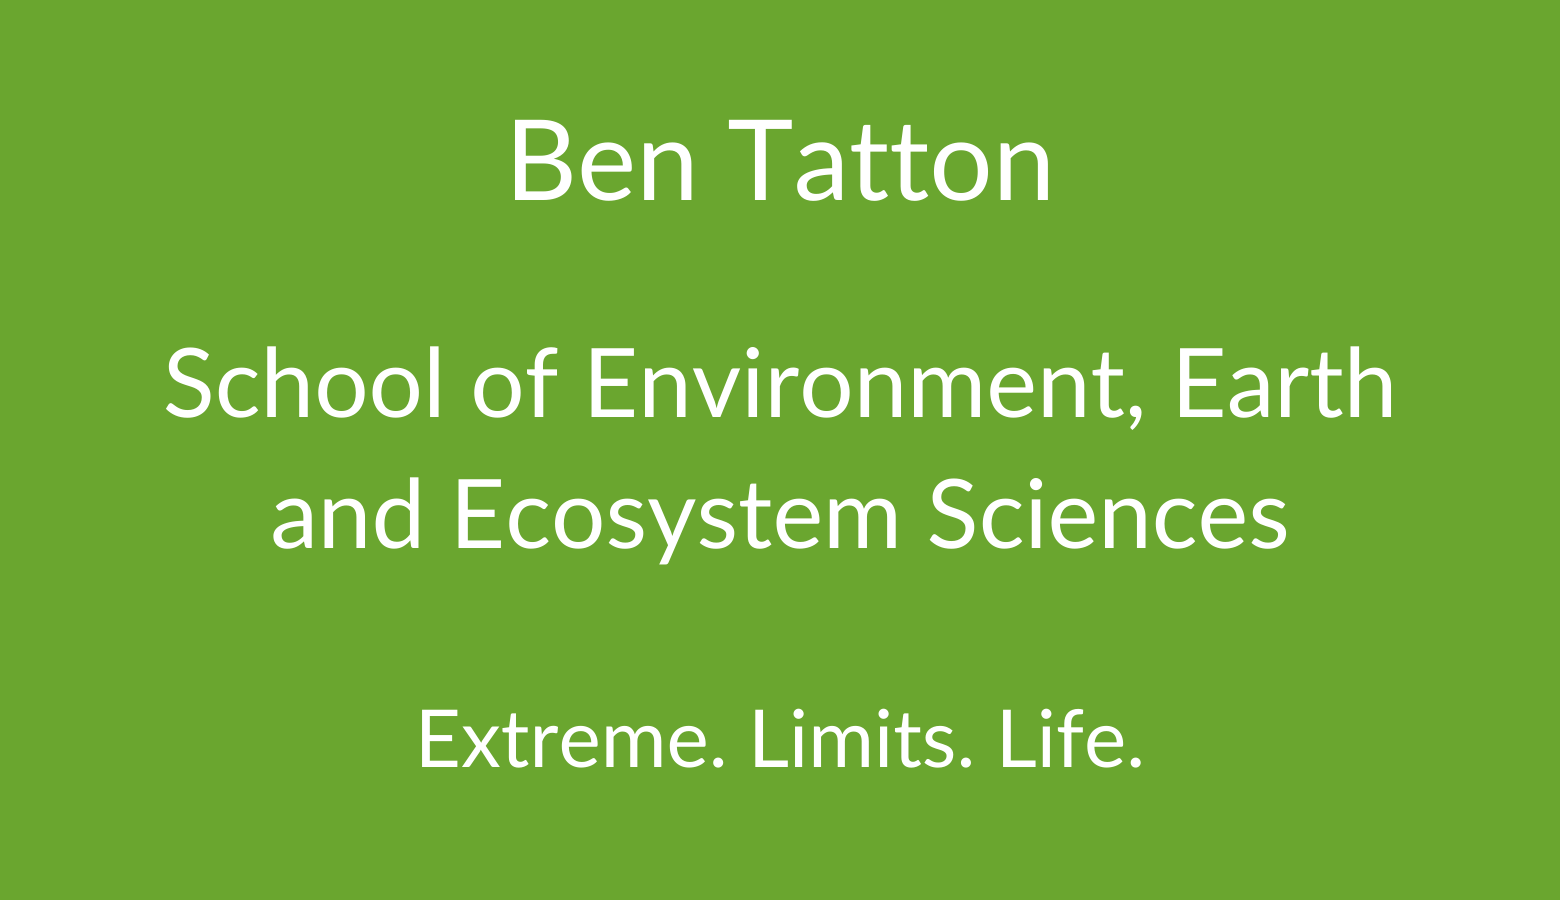 Ben Tatton. School of Environment, Earth and Ecosystem Sciences. Extreme. Limits. Life.